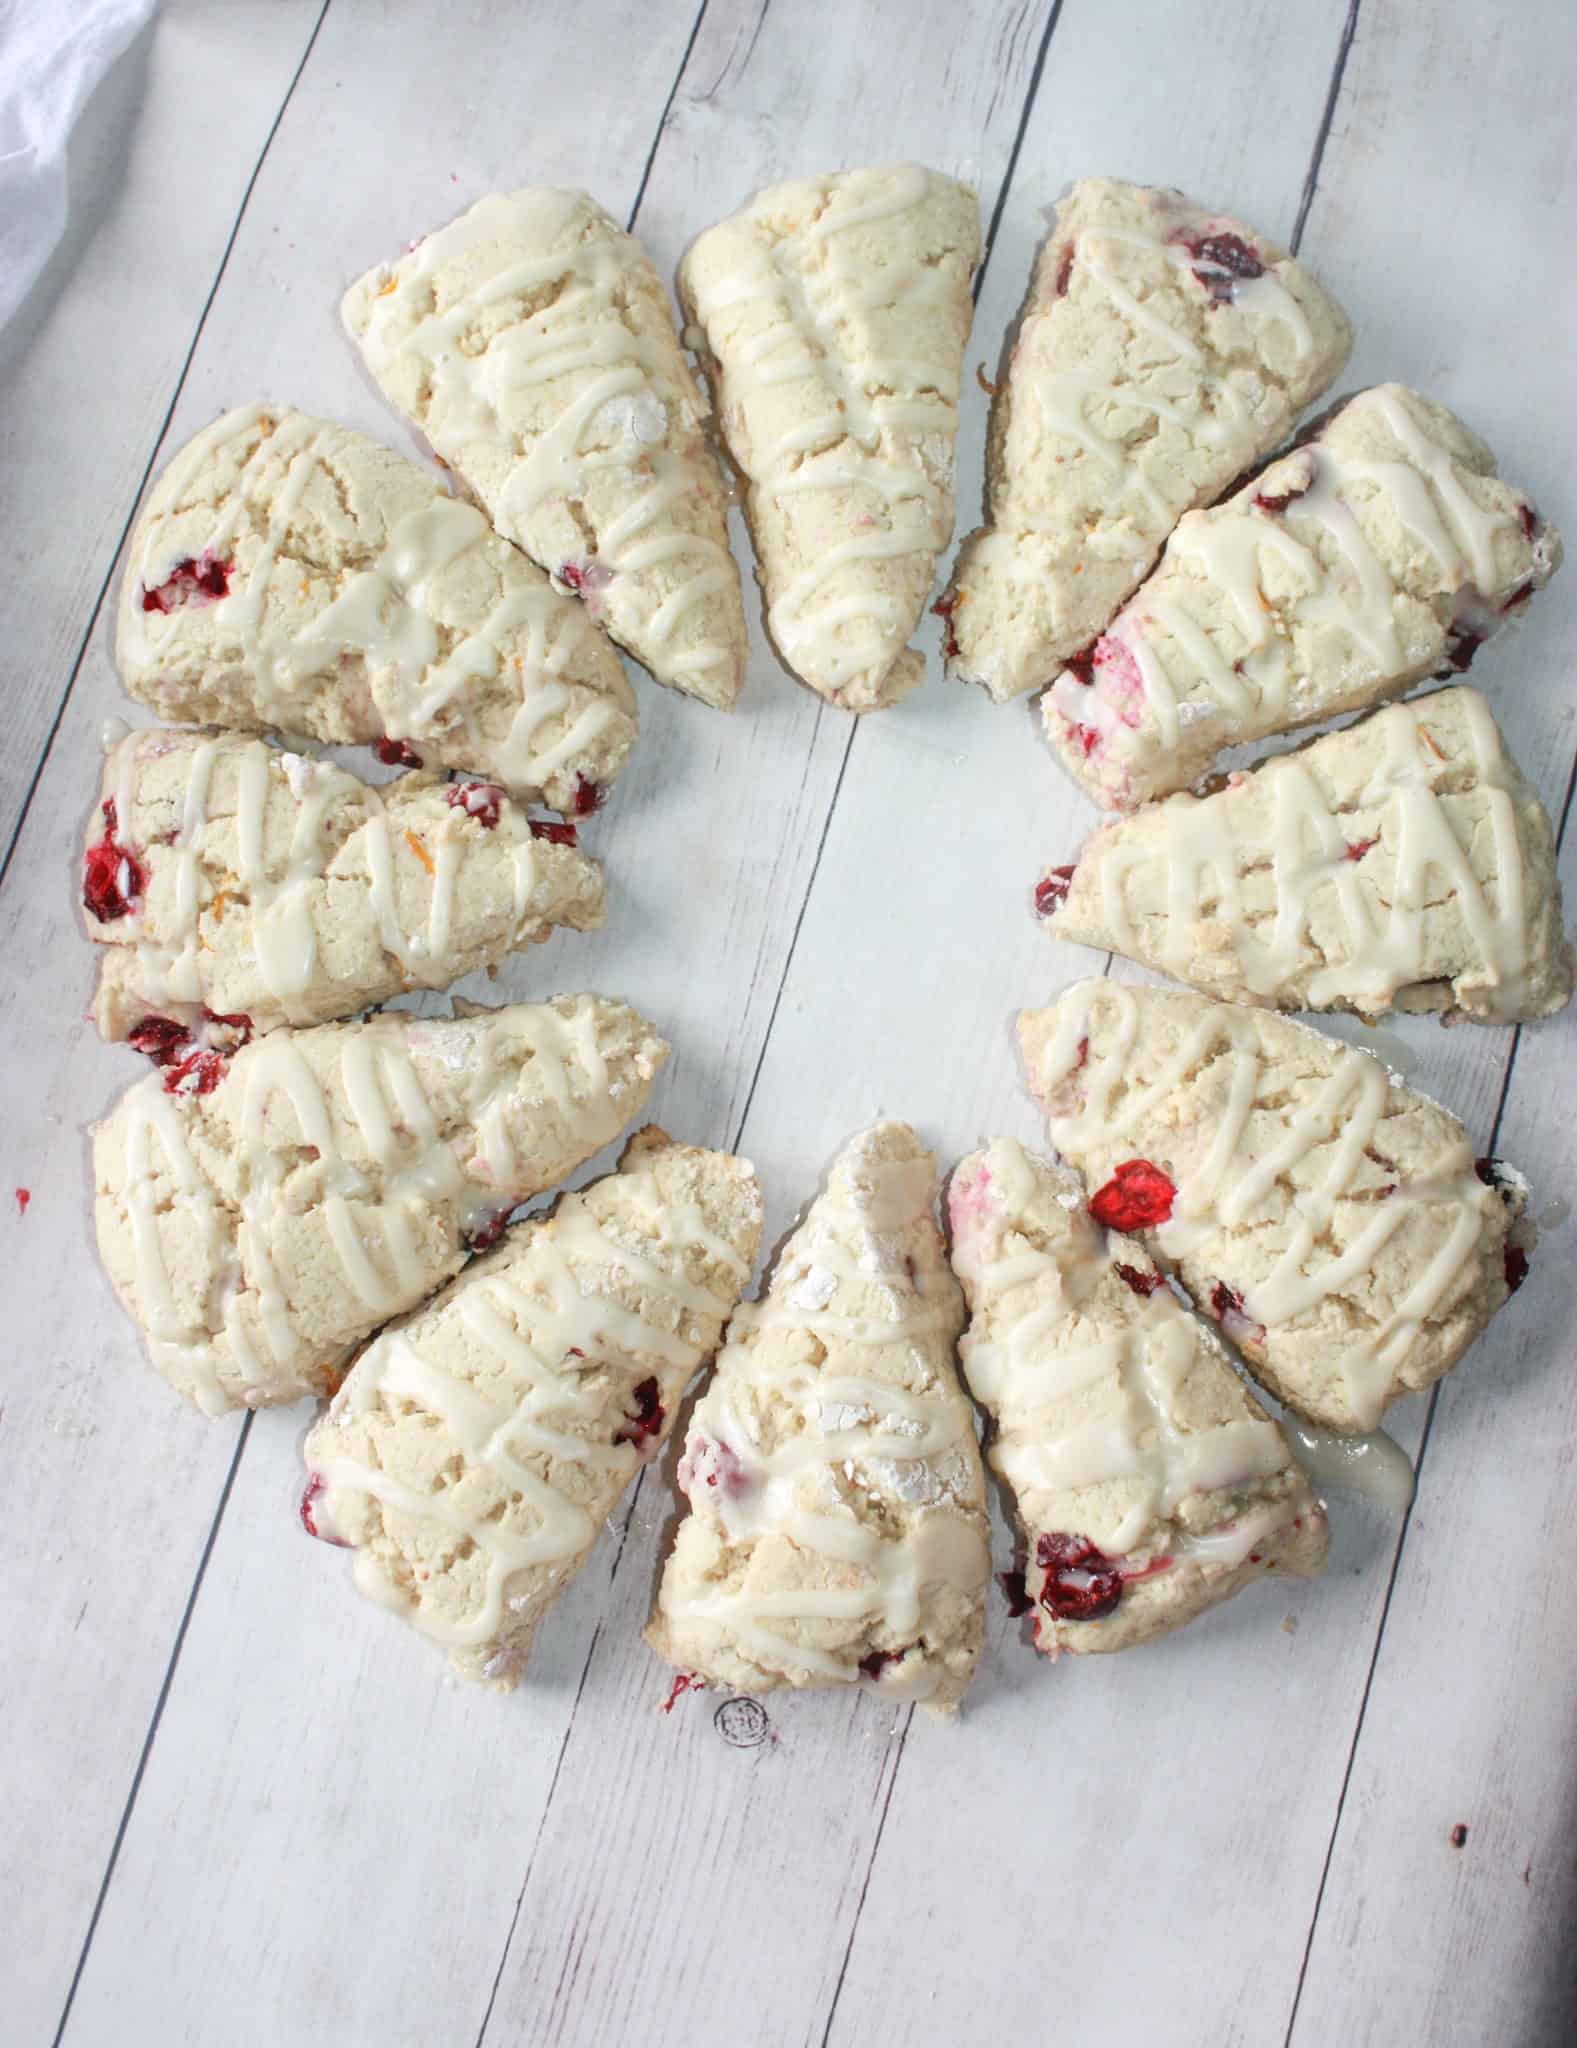 Orange Cranberry Scones are an easy baking recipe with a light, fluffy texture and these gluten free gems are loaded with flavour.